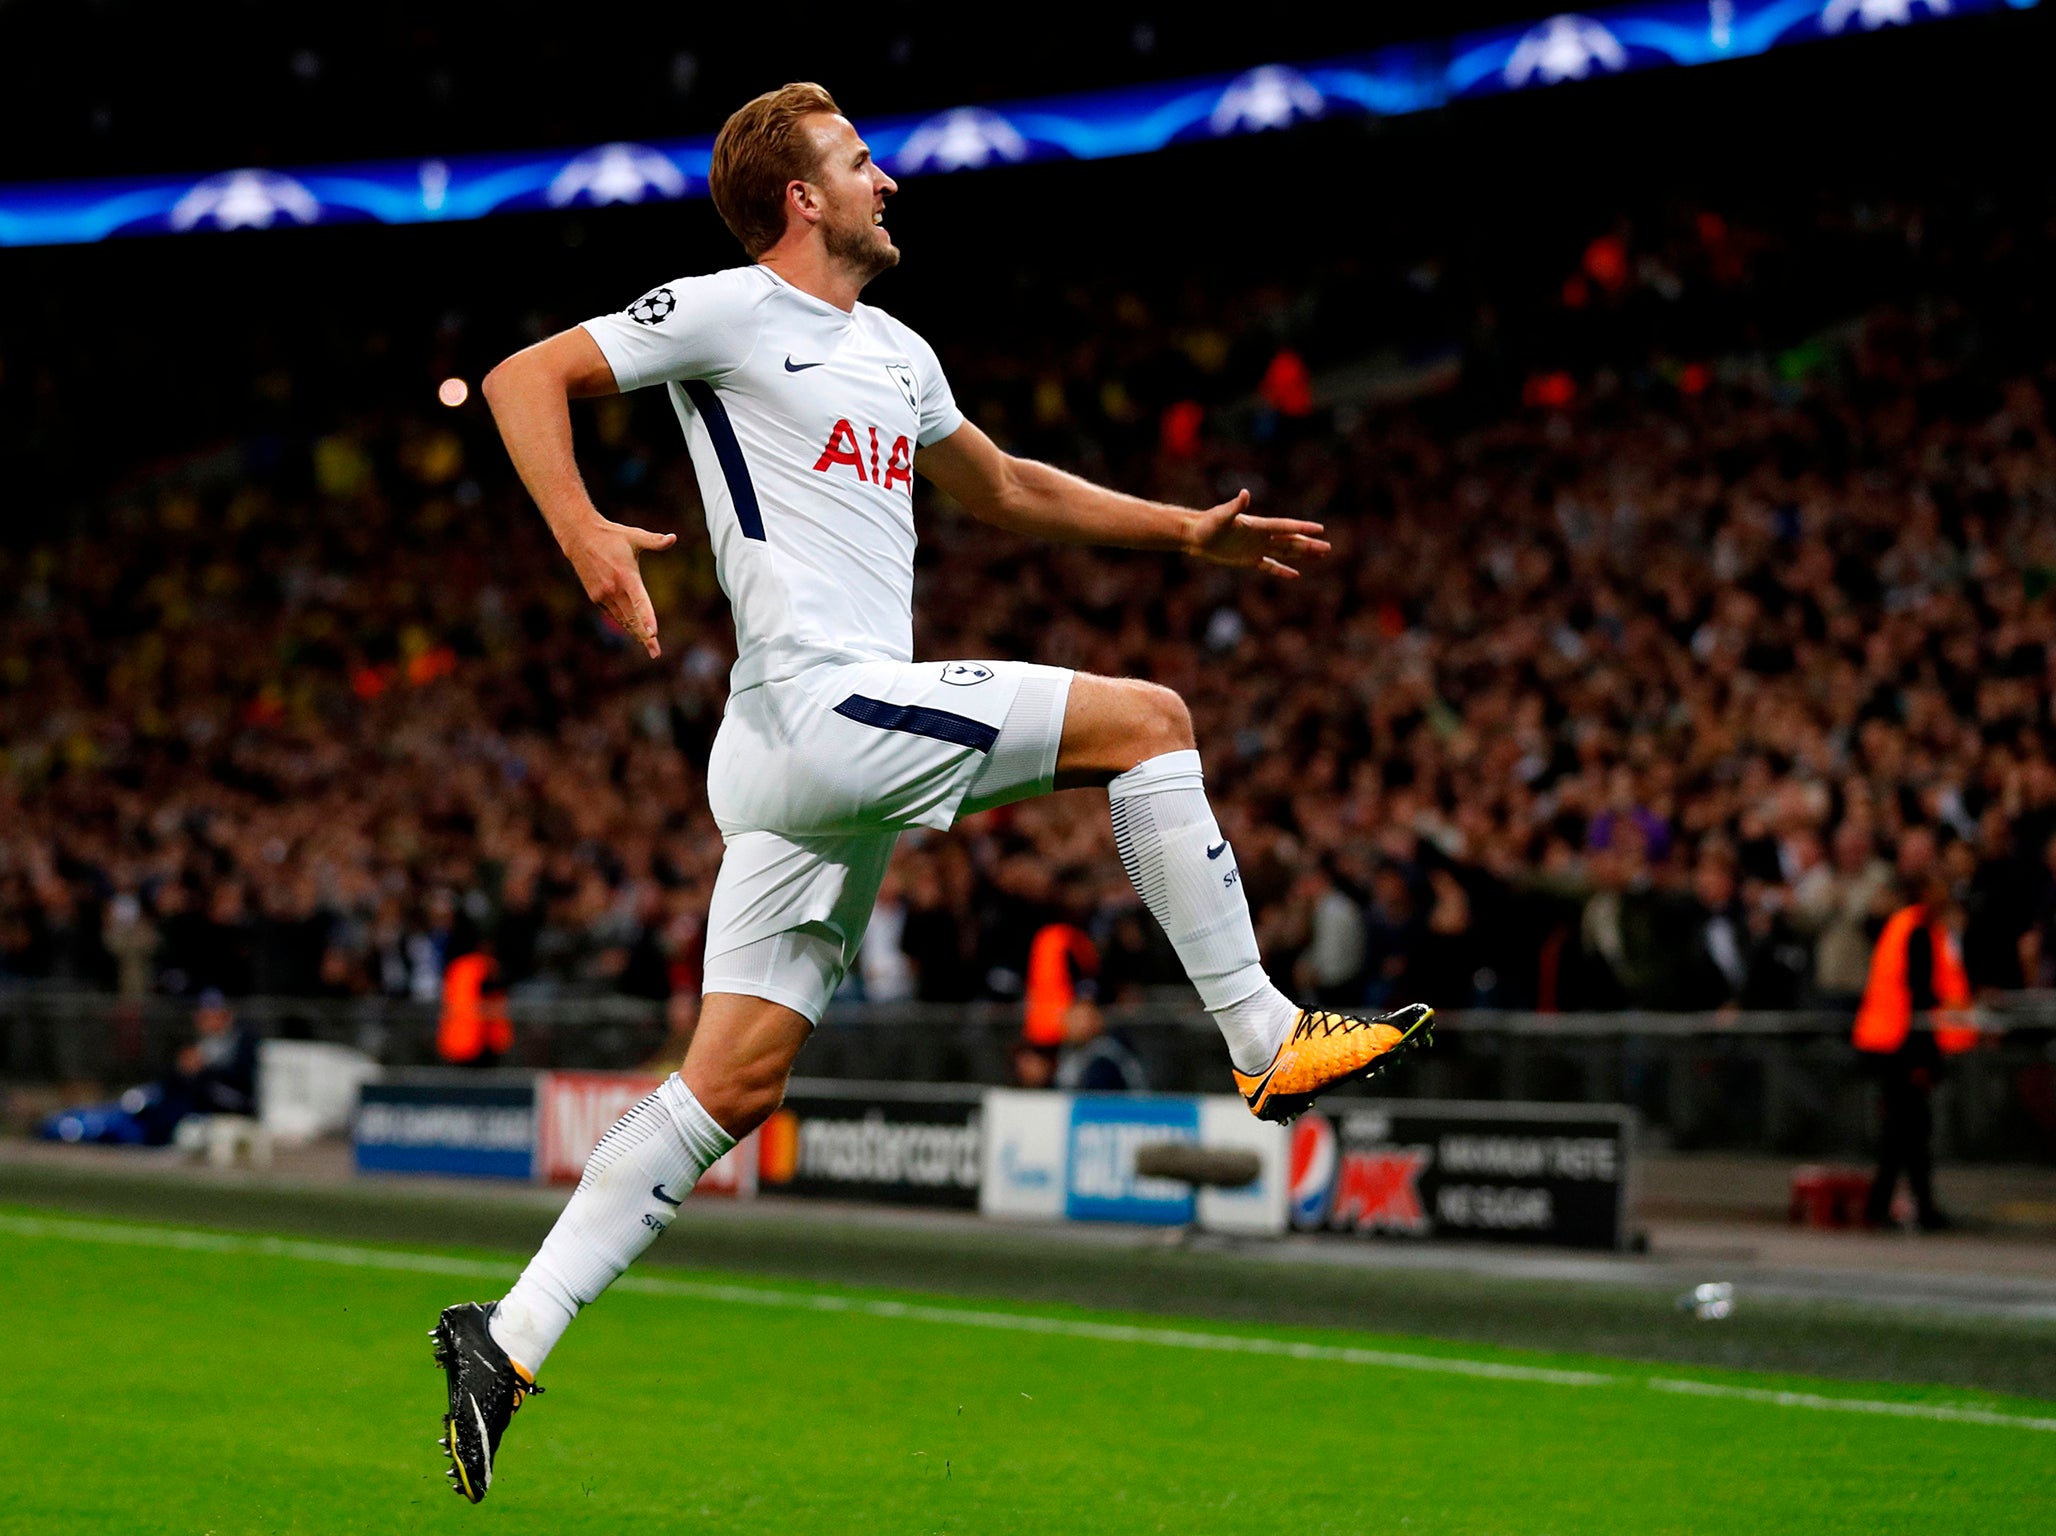 Kane struck a second as Spurs dominated